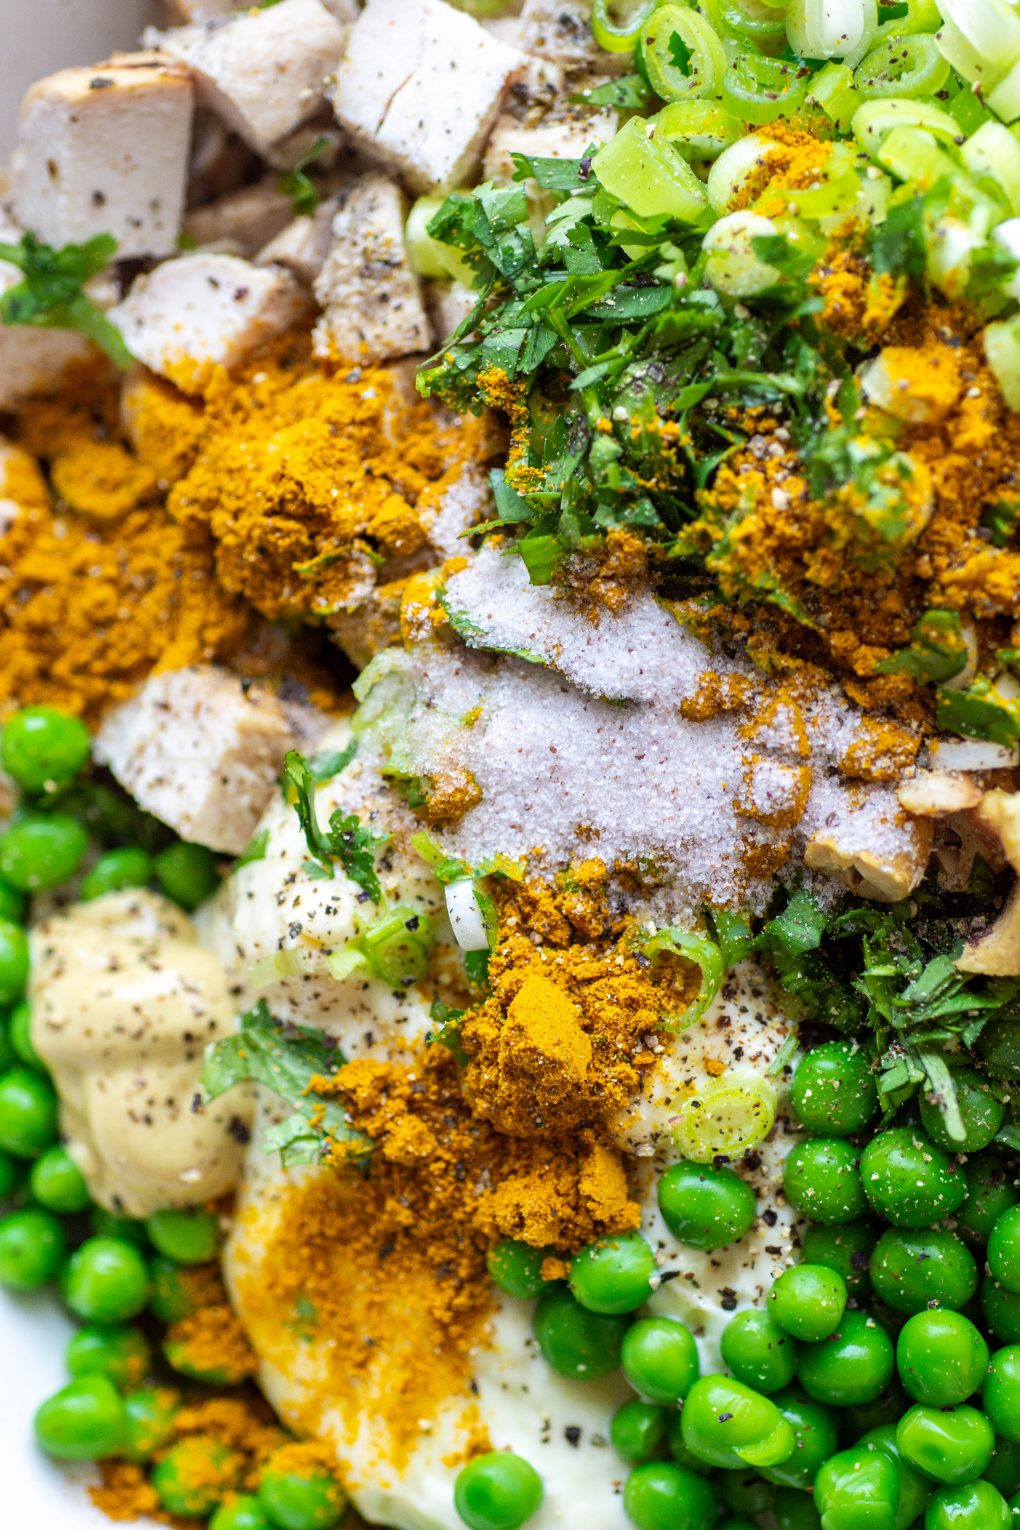 Overhead super close up view of curried chicken salad ingredients - chopped chicken, green peas, celery, green onions, cashews, mayo, and spices.